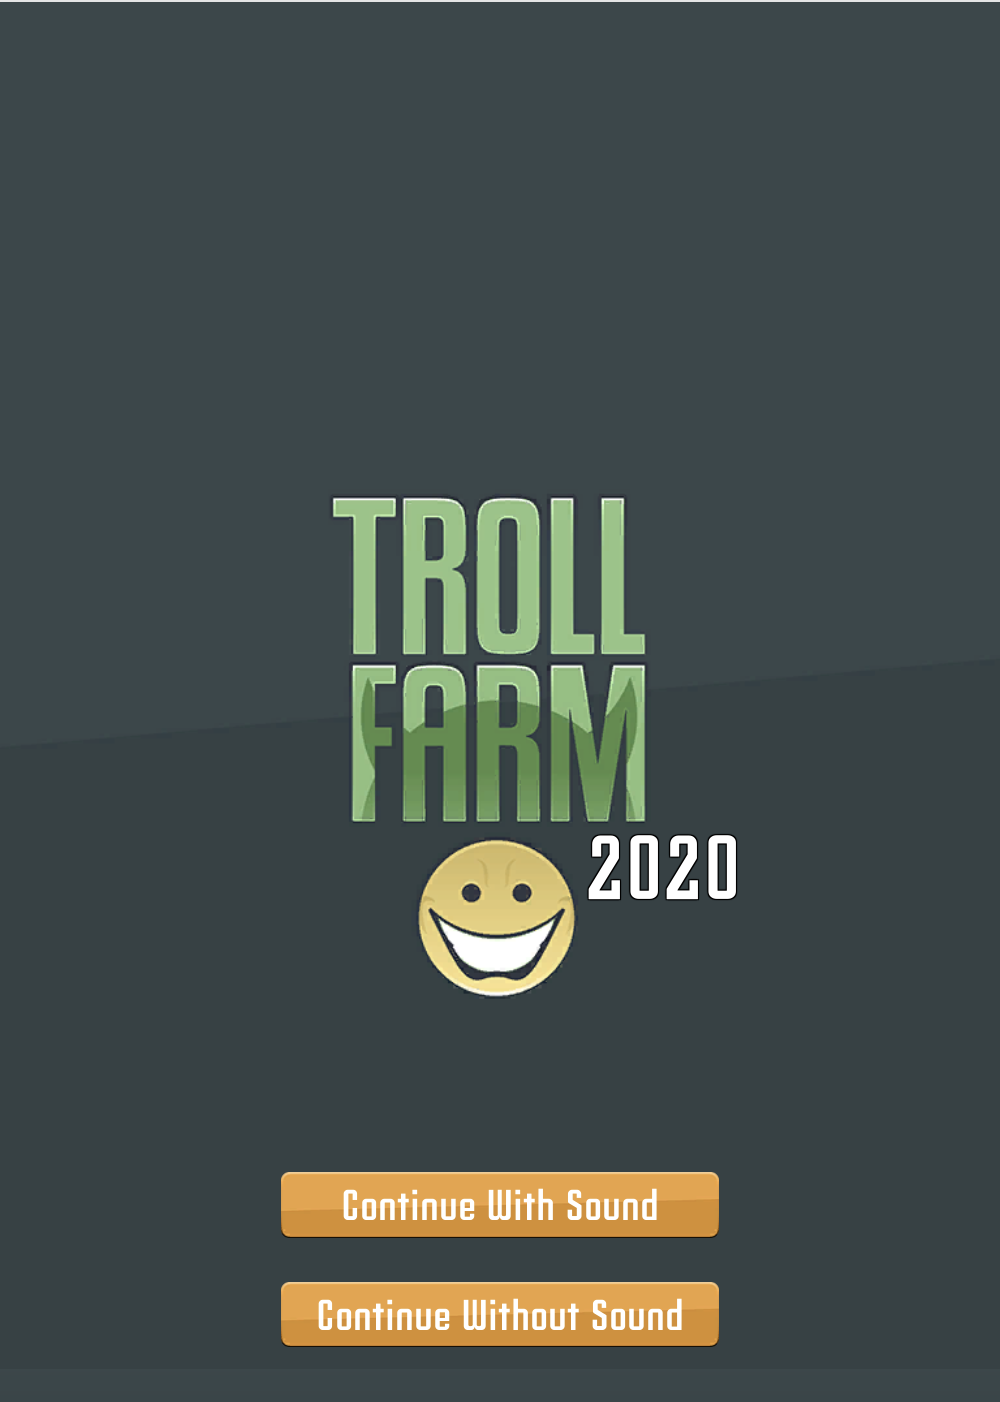 Idle clicker game that replicates the money and influence that troll farms have on society 